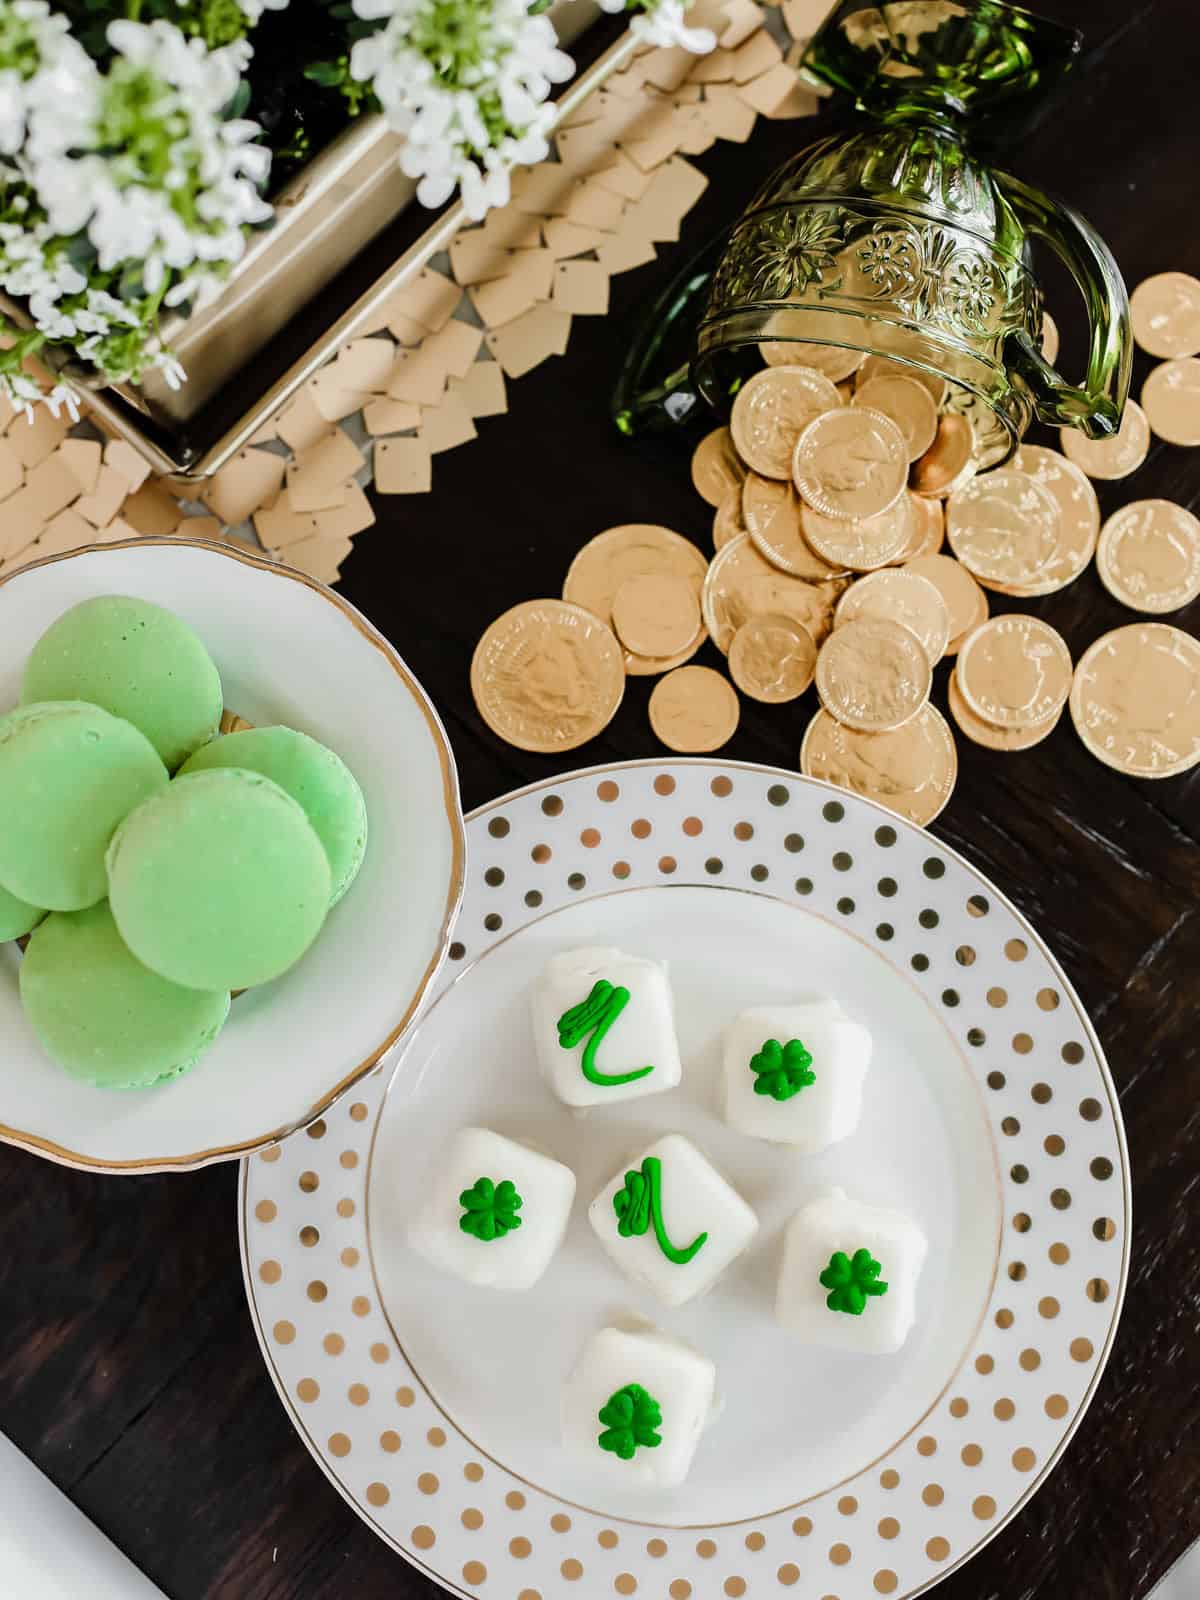 plates filled with green macarons and petit fours with green decorated icing, on table with gold coins for St patricks Irish theme.